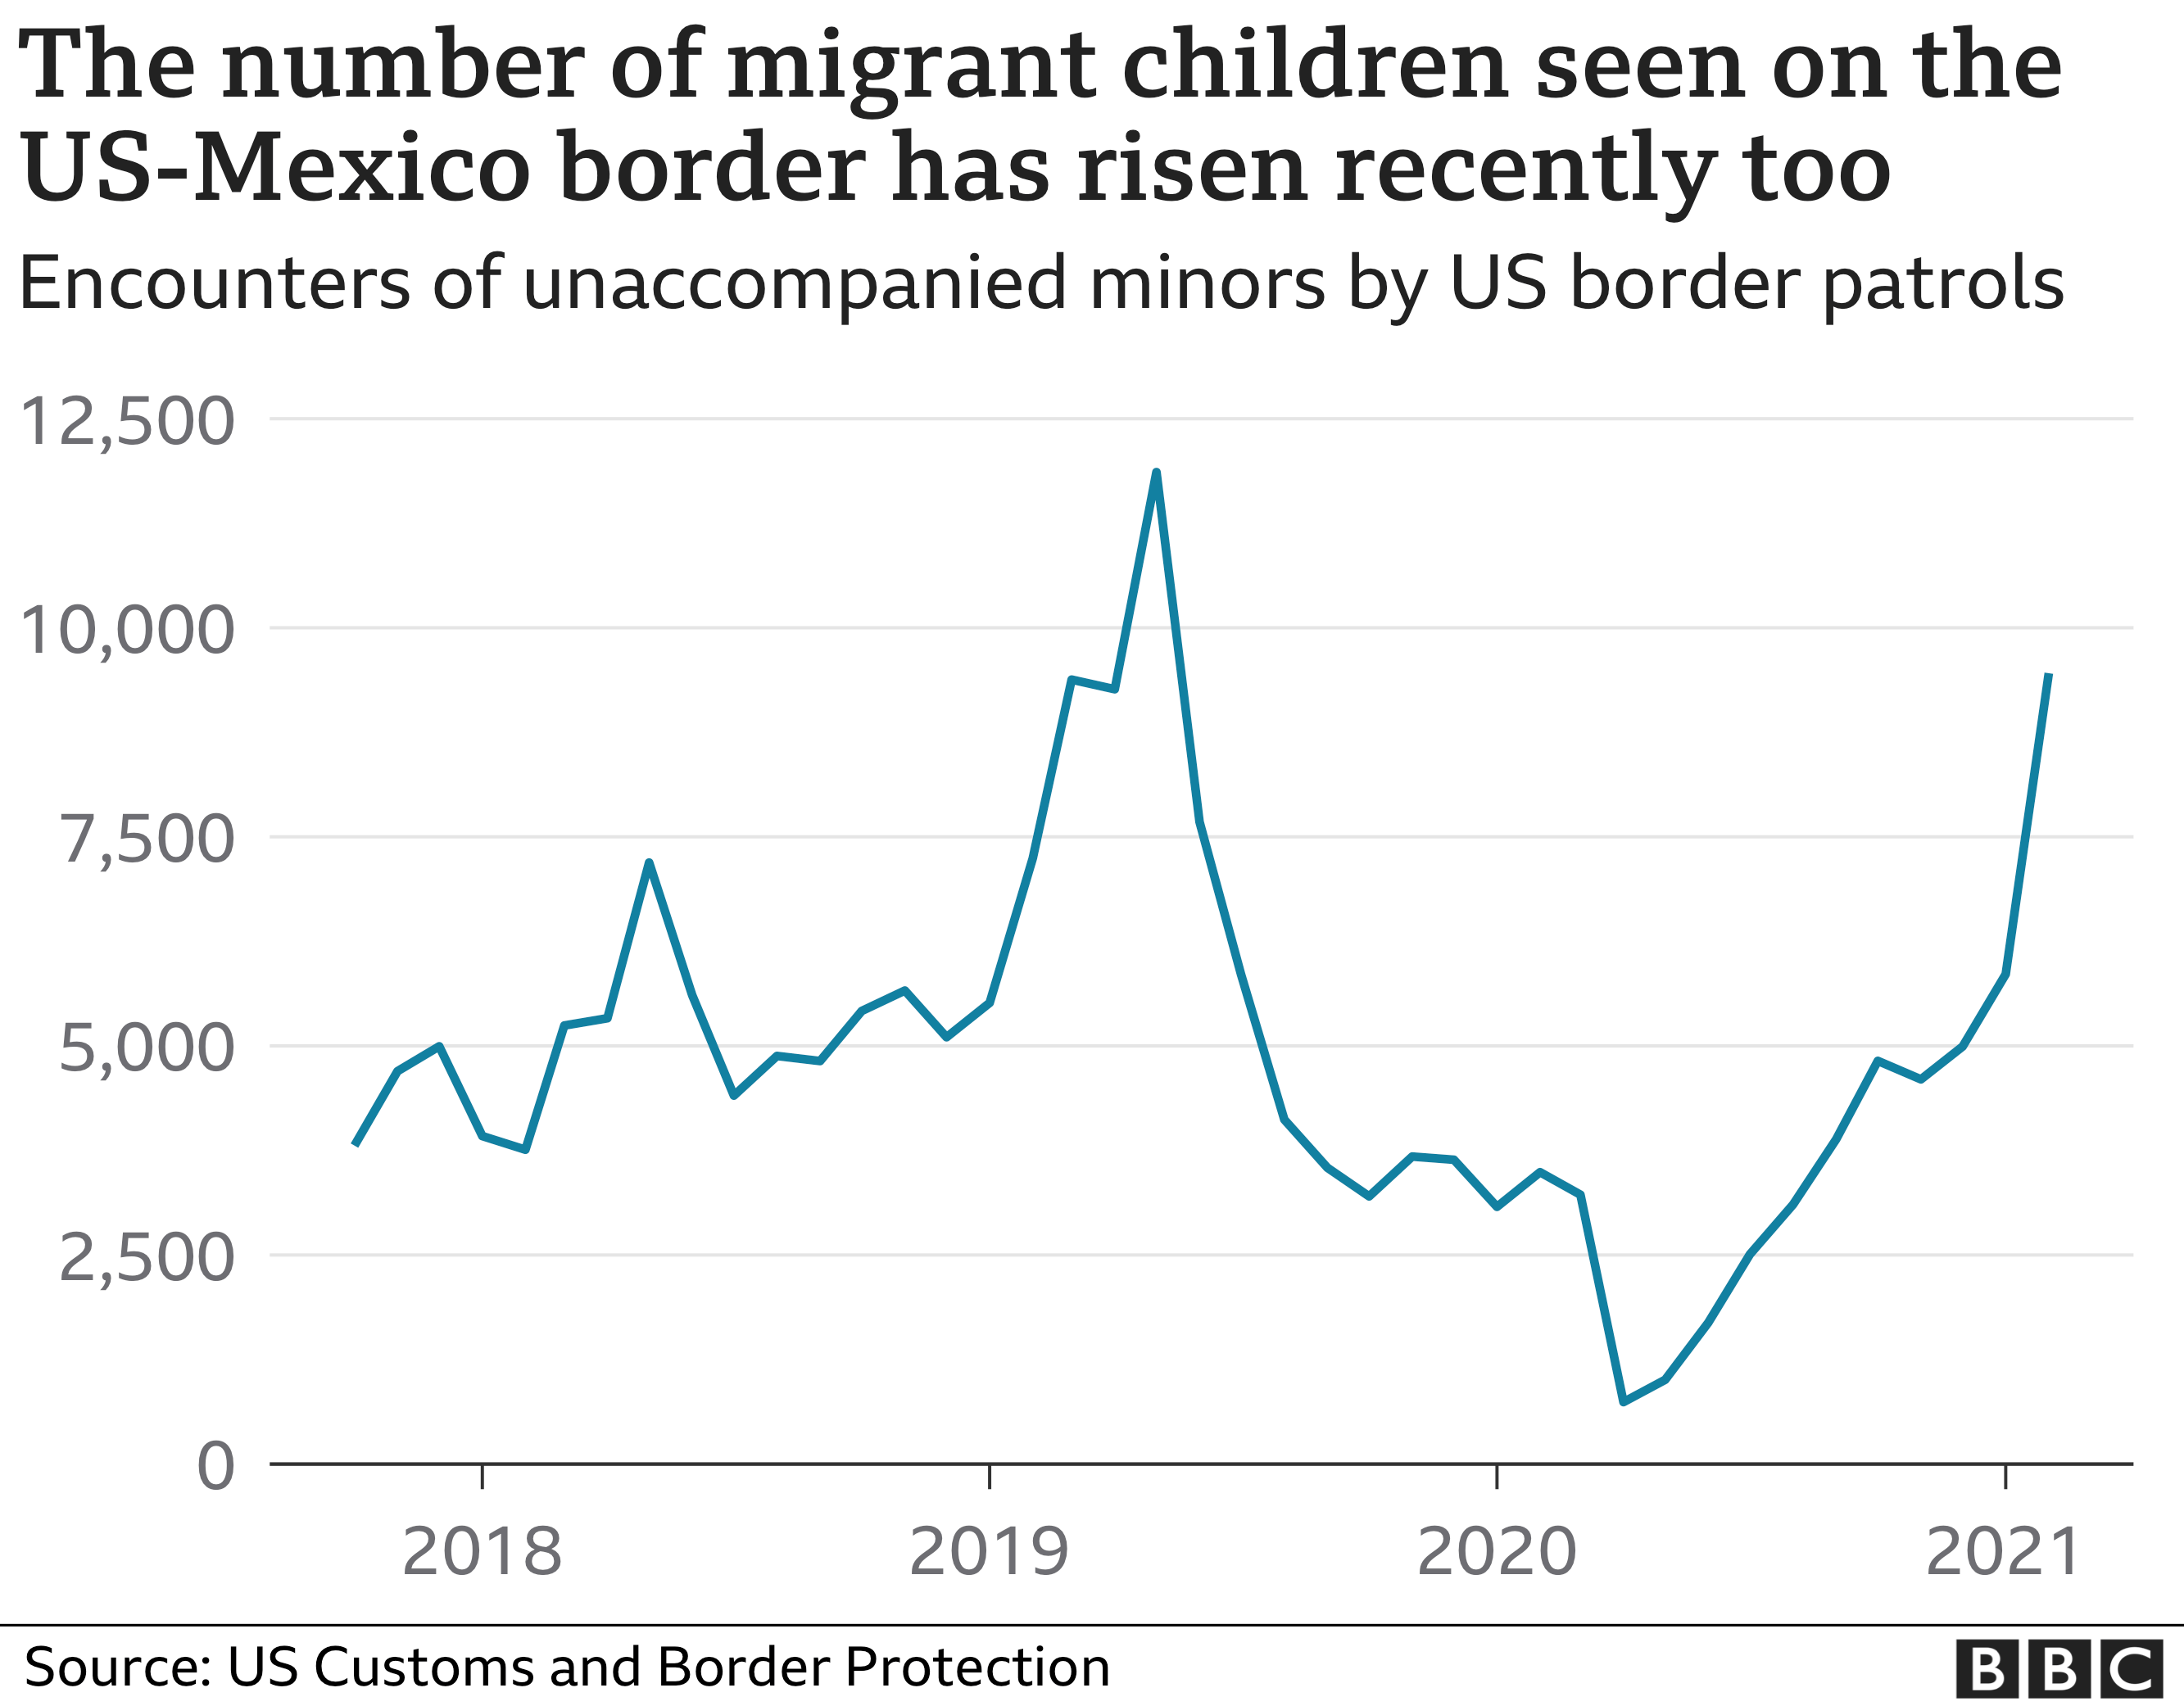 Graph of the number of migrant children arriving at the US-Mexico border over the last few years